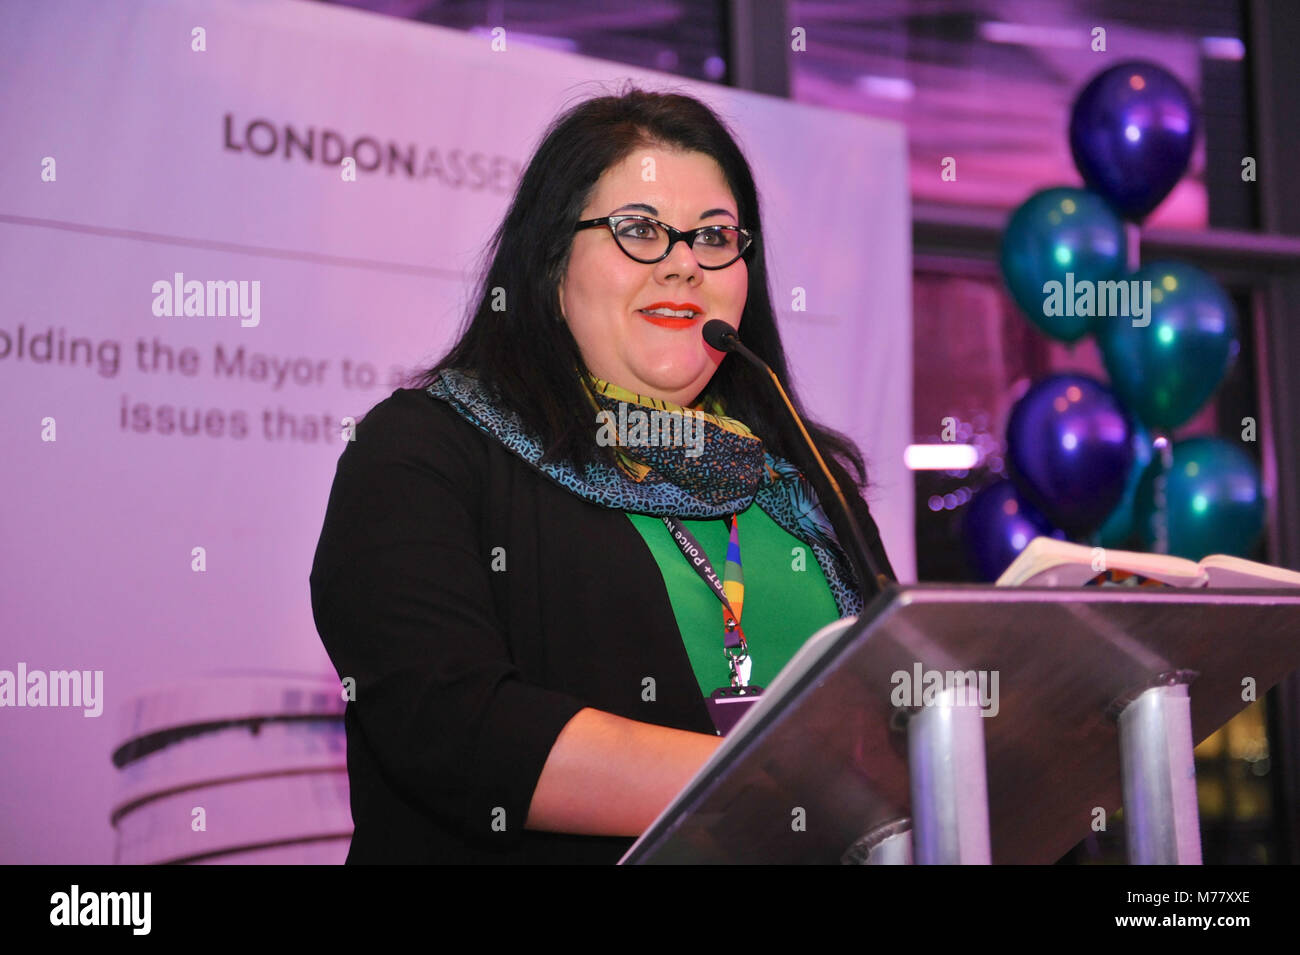 London, UK. 8th March, 2018. Amy Lamé (American-British performer, writer, TV/radio presenter and ’Night Czar' for the Mayor of London) speaking at a reception event in London’s City Hall to celebrate International Women’s Day, hosted by the Chair of the London Assembly, Jennette Arnold OBE AM.   Credit: Michael Preston/Alamy Live News Stock Photo